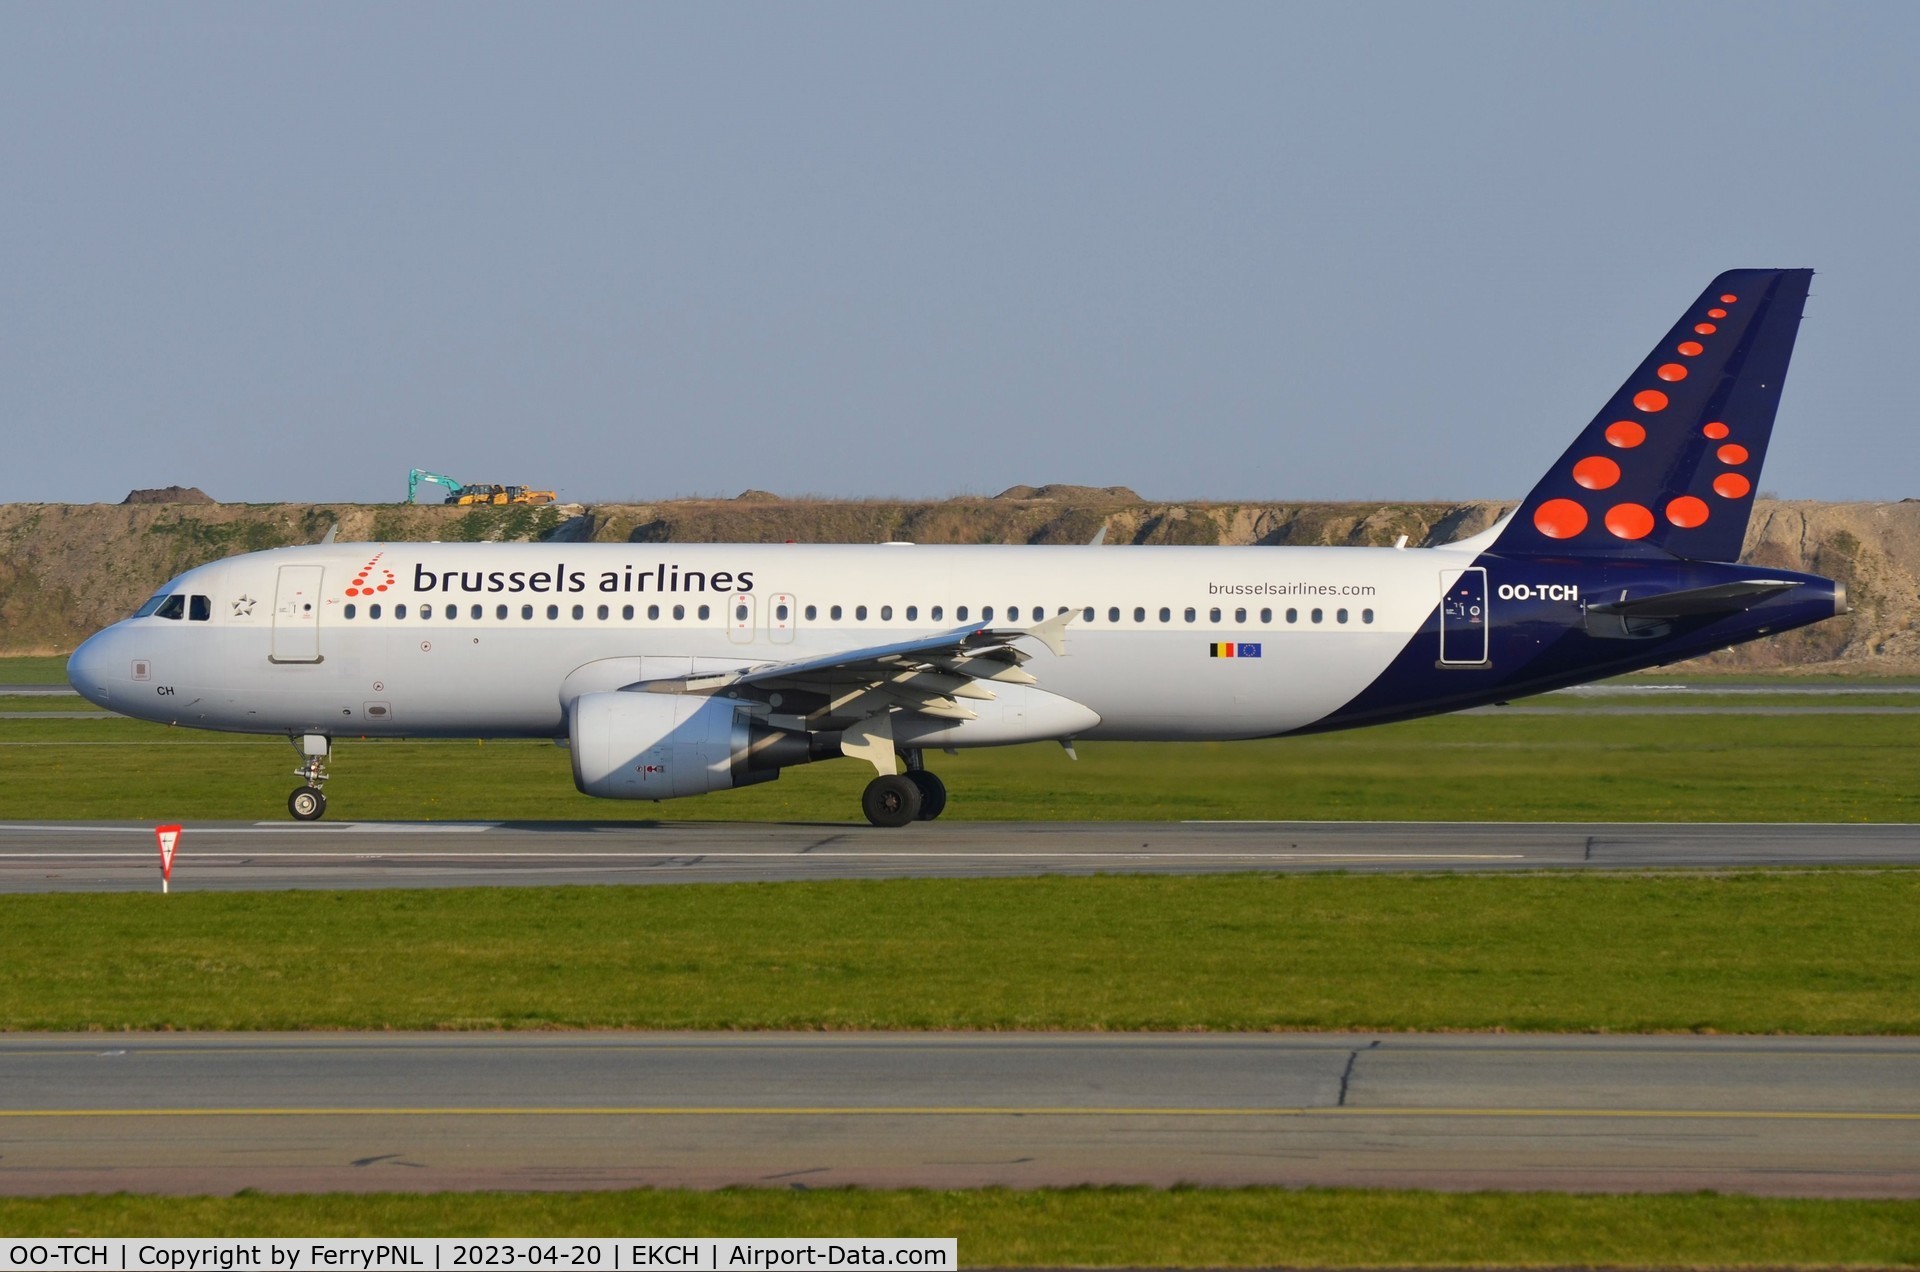 OO-TCH, 2003 Airbus A320-214 C/N 1929, Arrival from BRU: Brussels A320